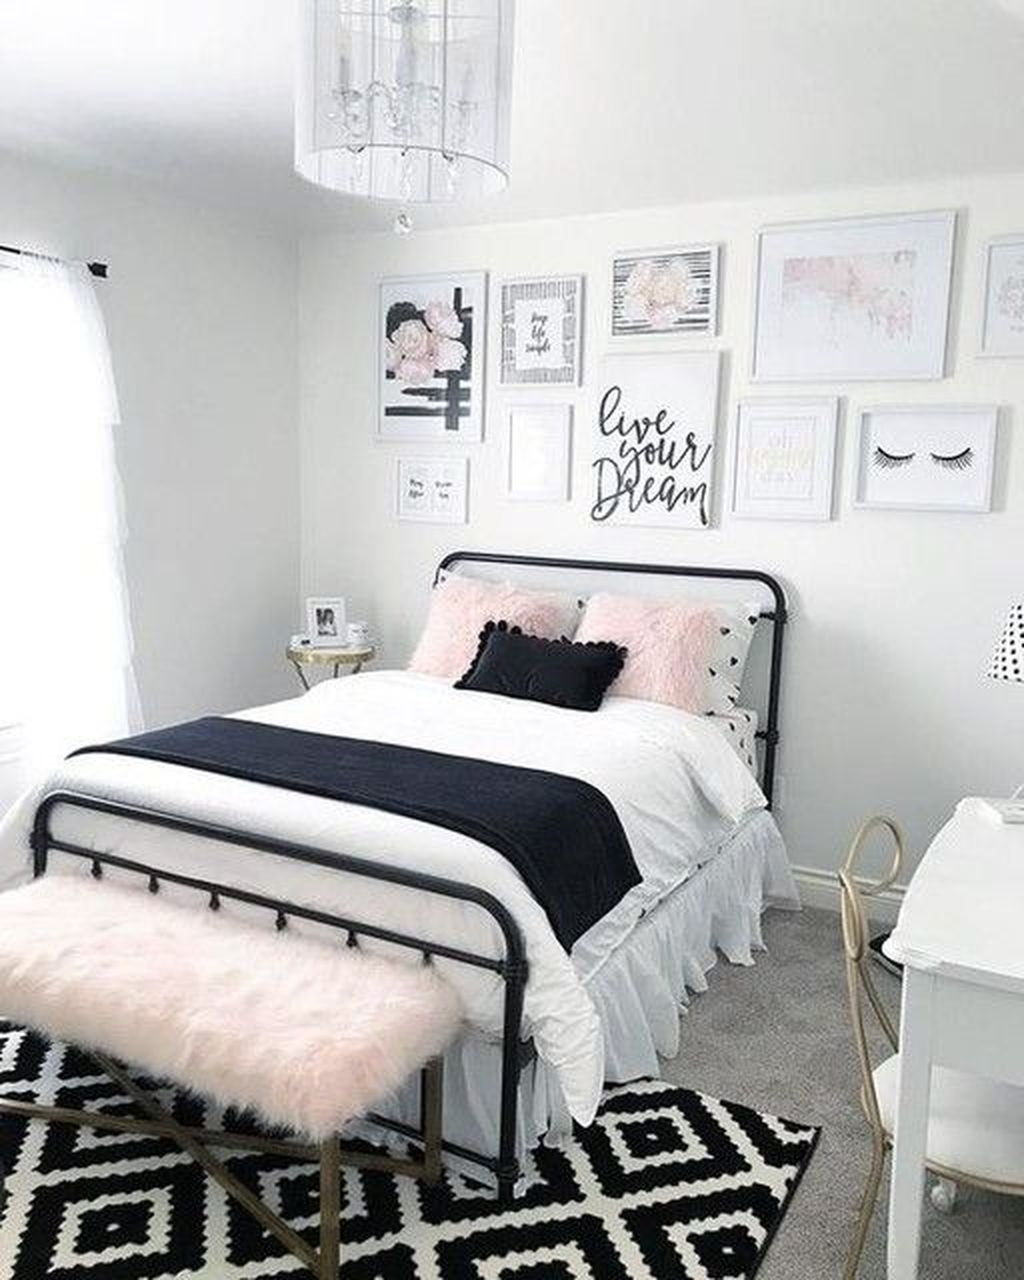 Stunning Teens Bedrooms Design Ideas For Small Spaces To Try 21